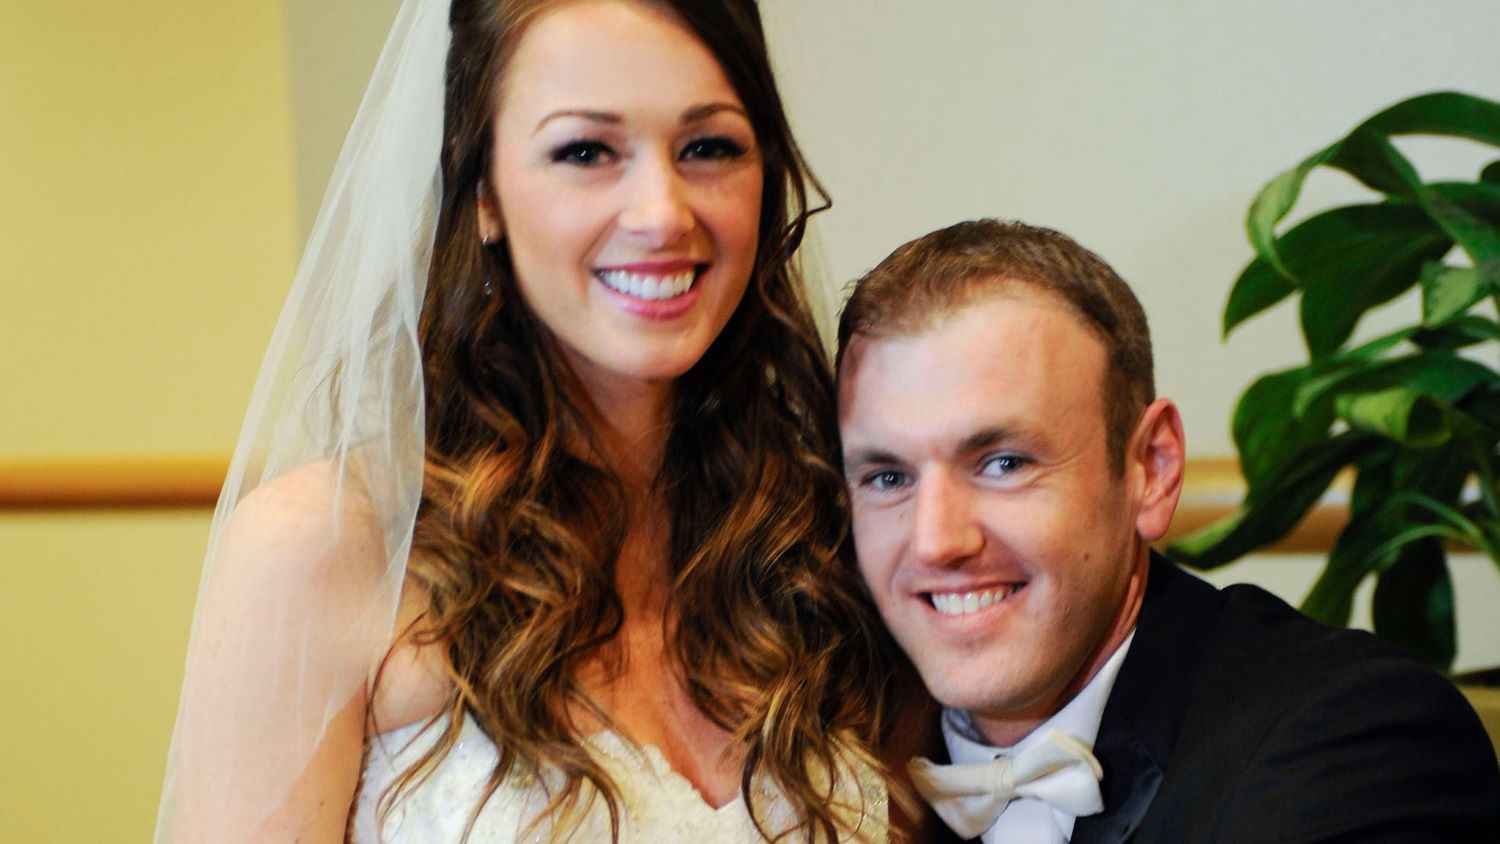 Are Married at First Sight's Jamie Otis and Doug Hehner Still Together